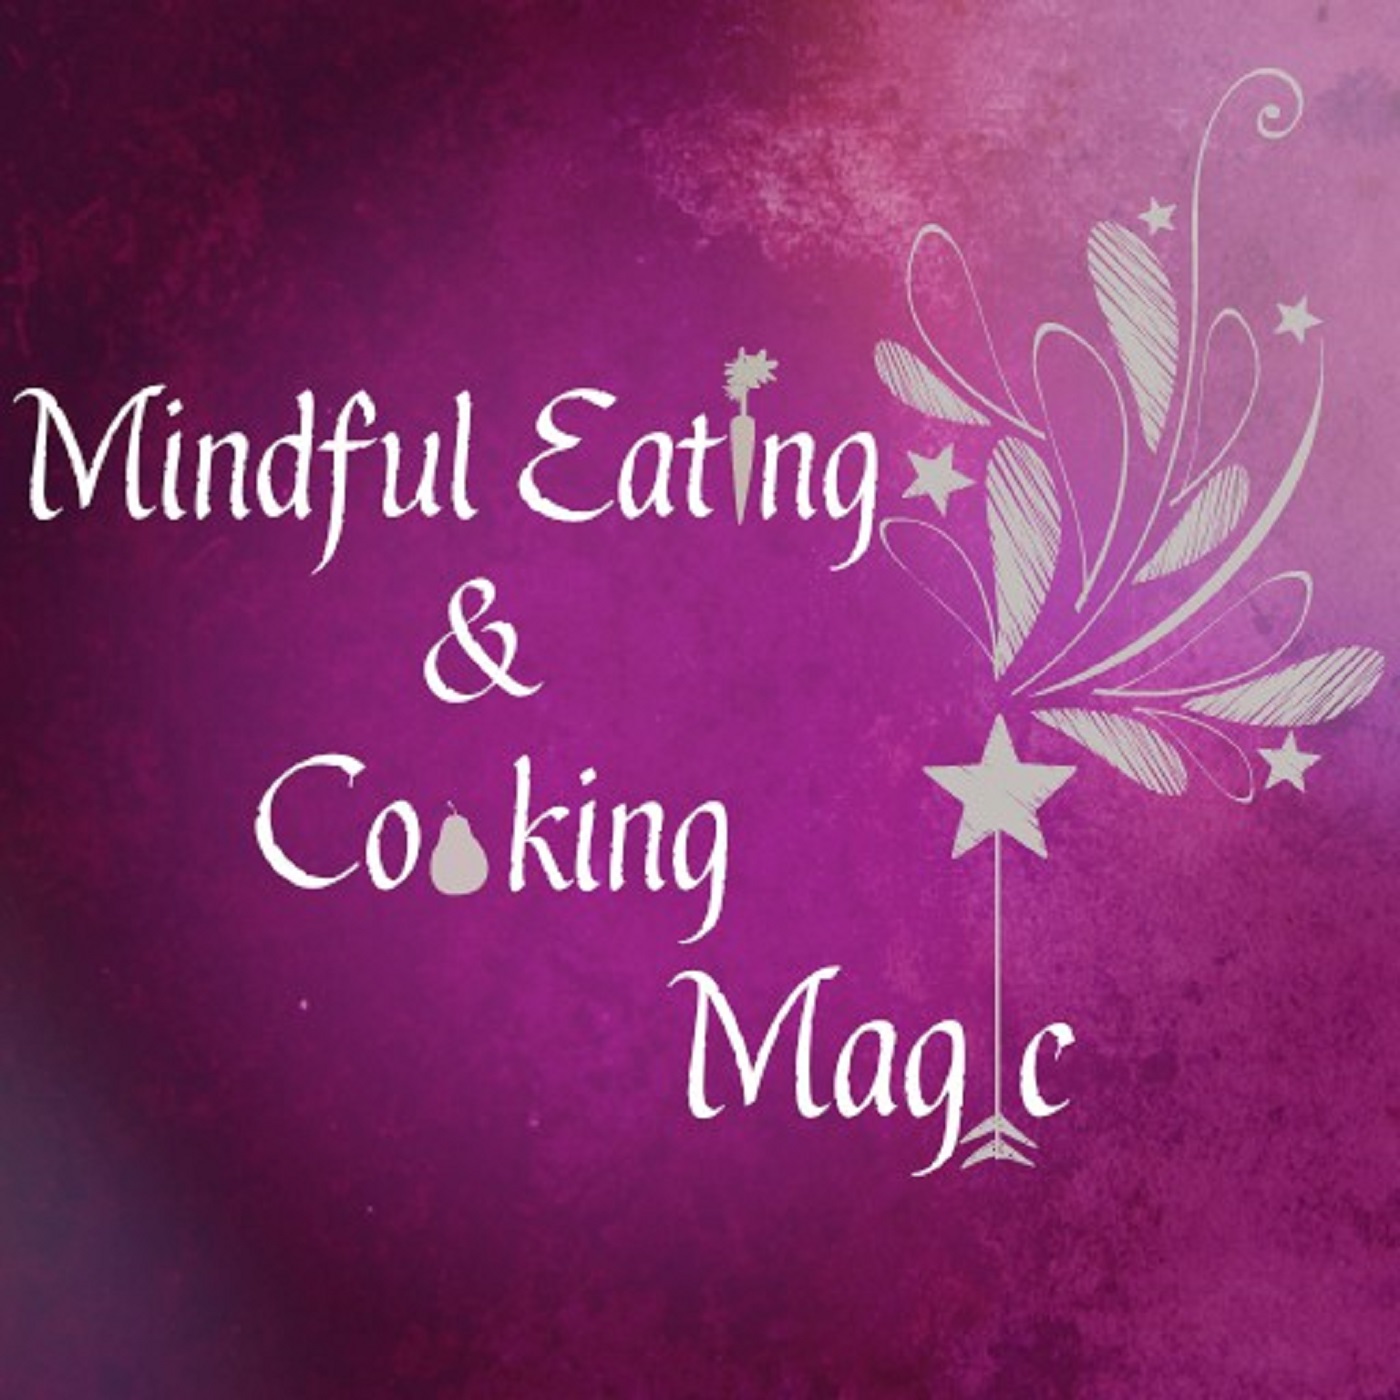 Mindful Cooking & Eating Magic